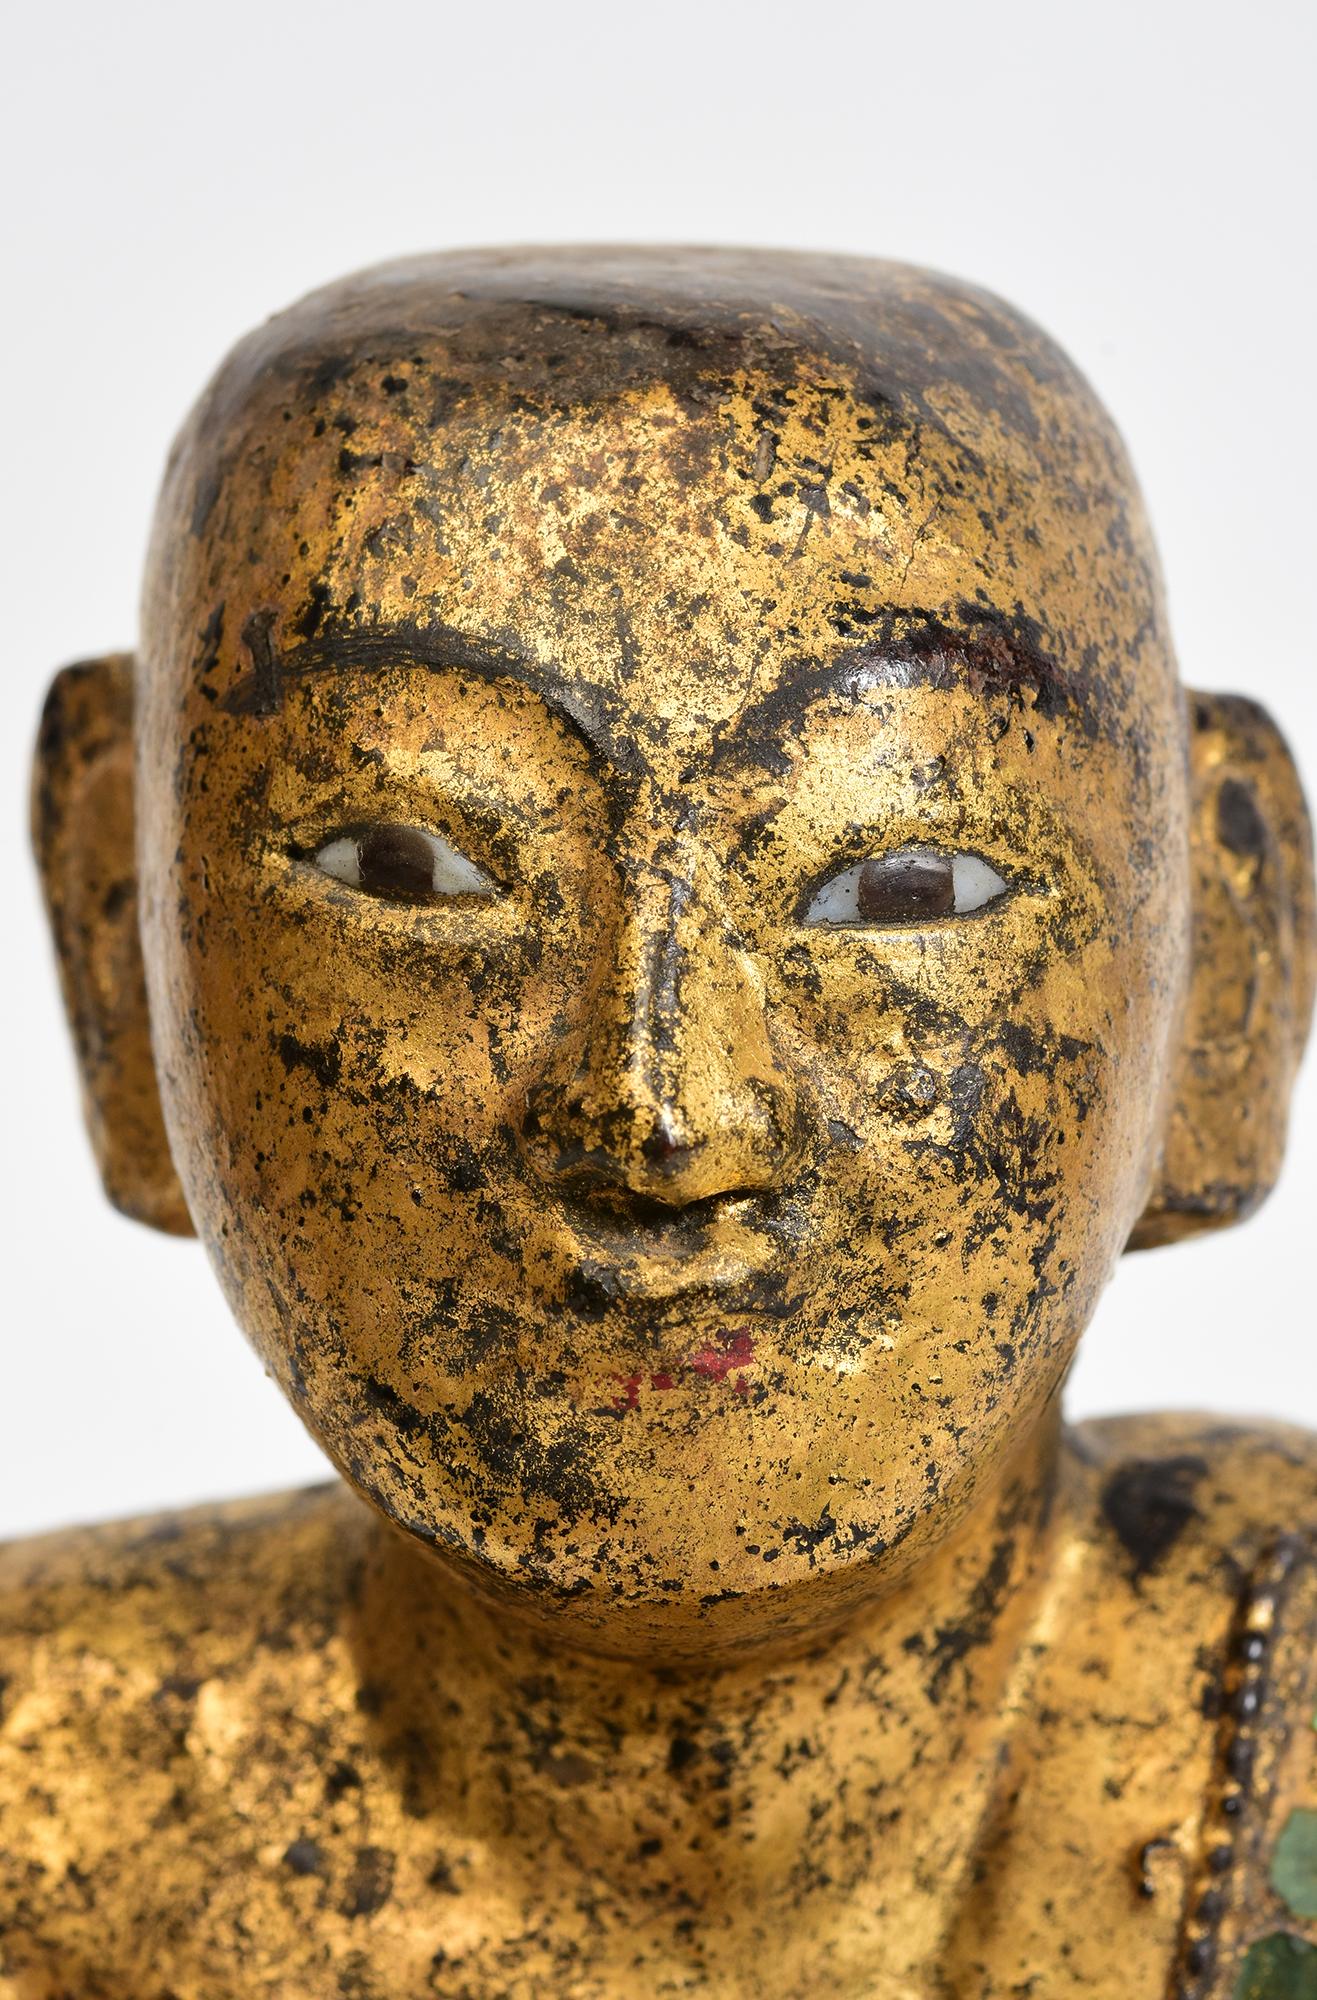 Antique Burmese wooden seated disciple, with gilded gold and inlay of colorful glass pieces on the borders of the robes.

Age: Burma, Mandalay Period, 19th Century
Size: Height 20.3 C.M. / Width 16.5 C.M. / Length 15.7 C.M.
Condition: Nice condition